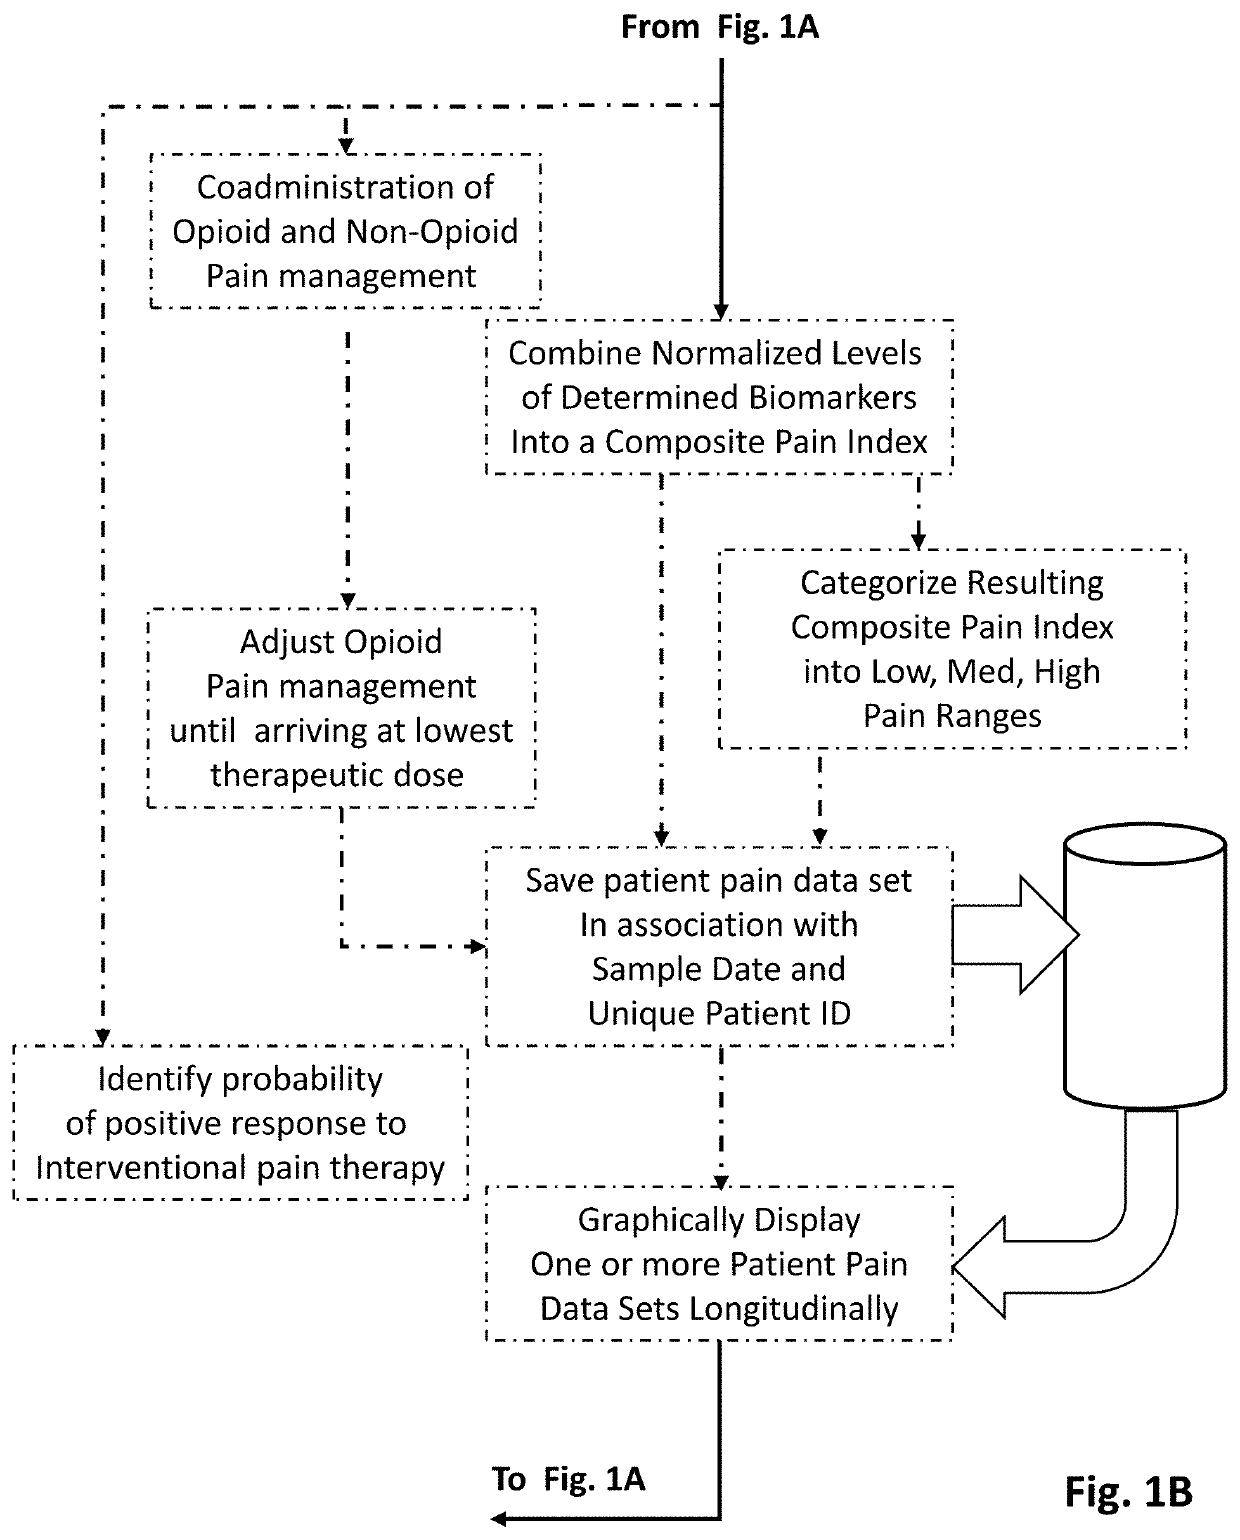 Methods of diagnosing and treating particular causal components of chronic pain in a patient